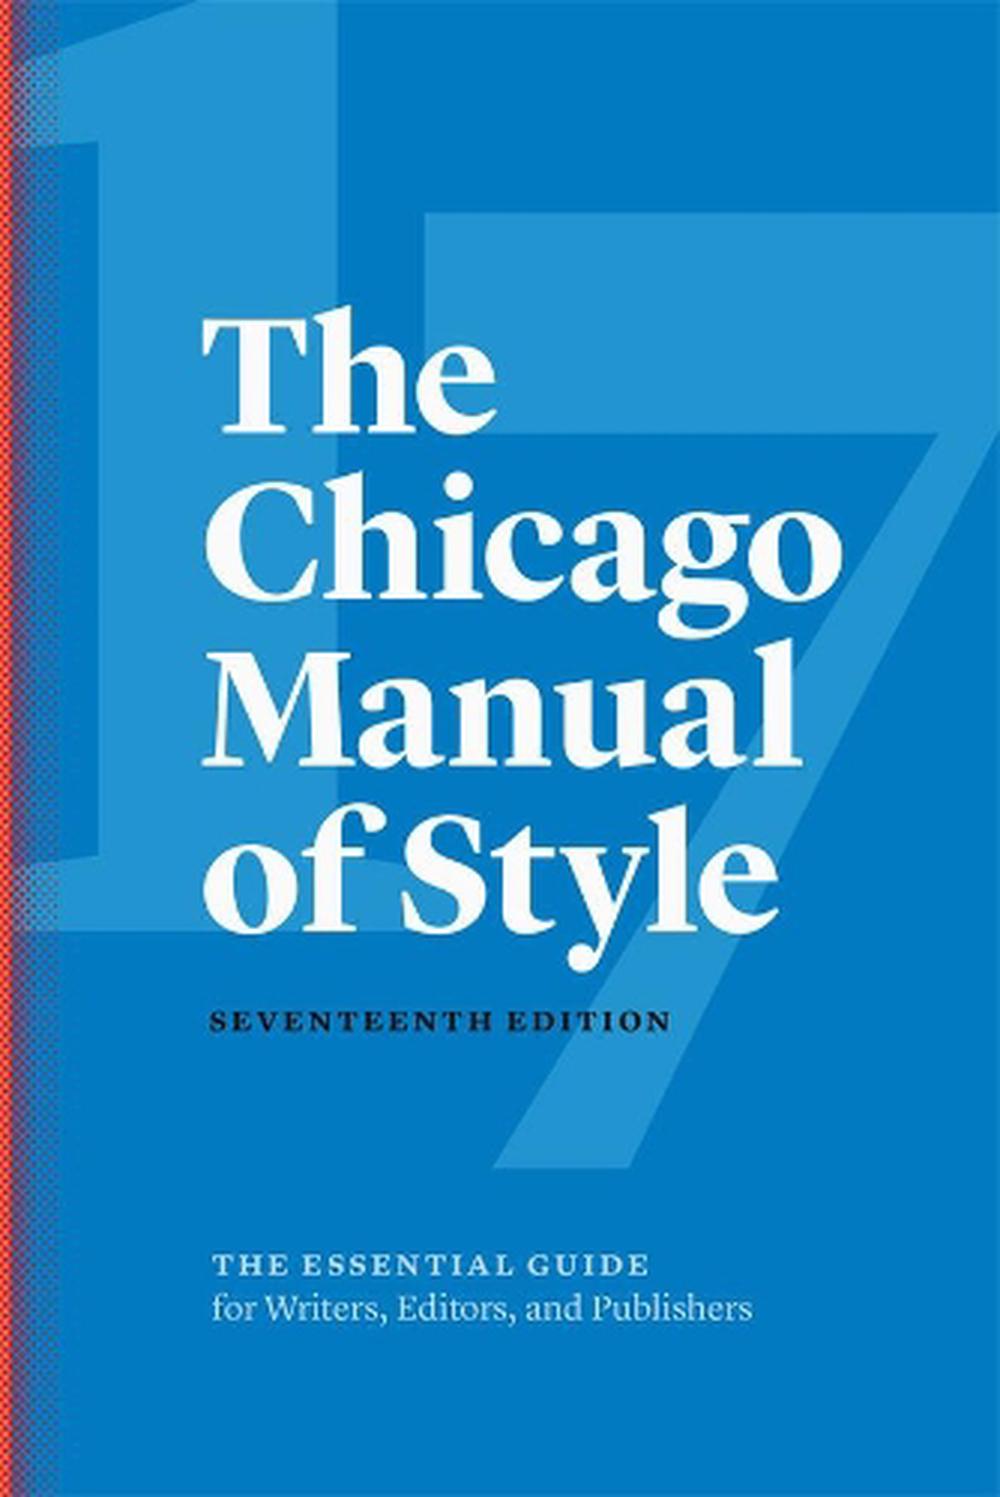 chicago-manual-of-style-by-university-of-chicago-press-hardcover-book